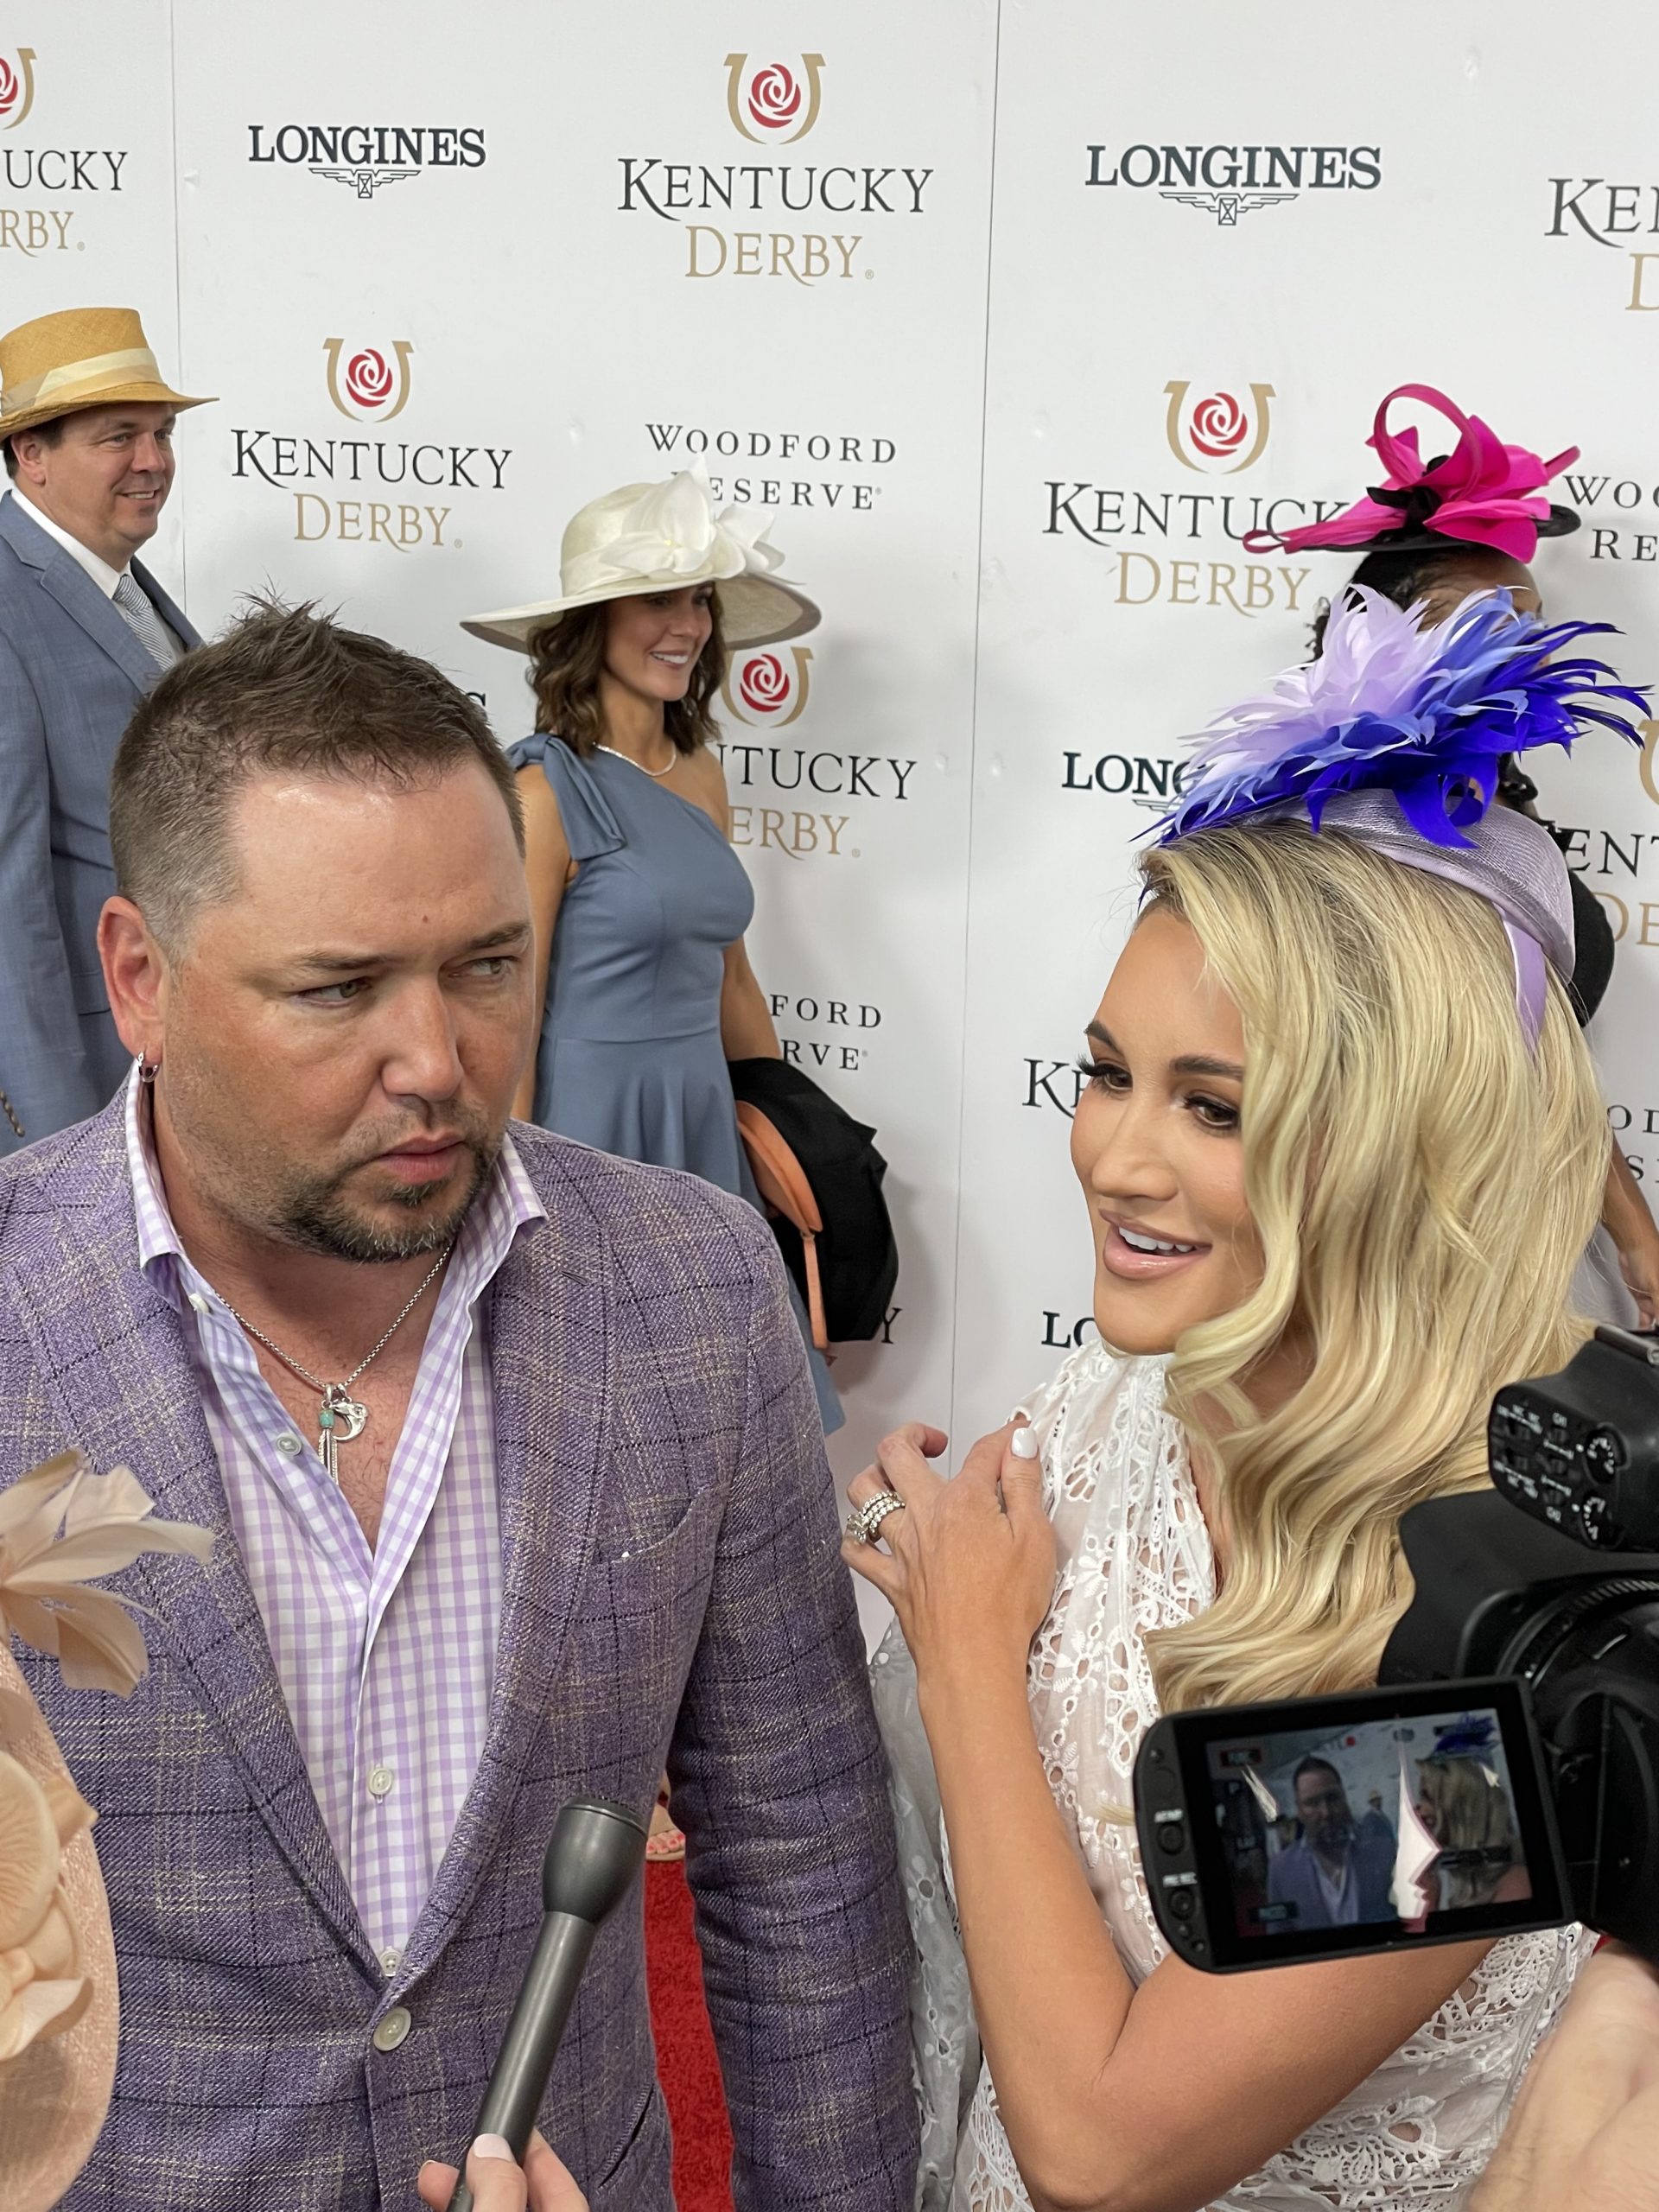 Jason Aldean and his wife at the Kentucky Derby Red Carpet